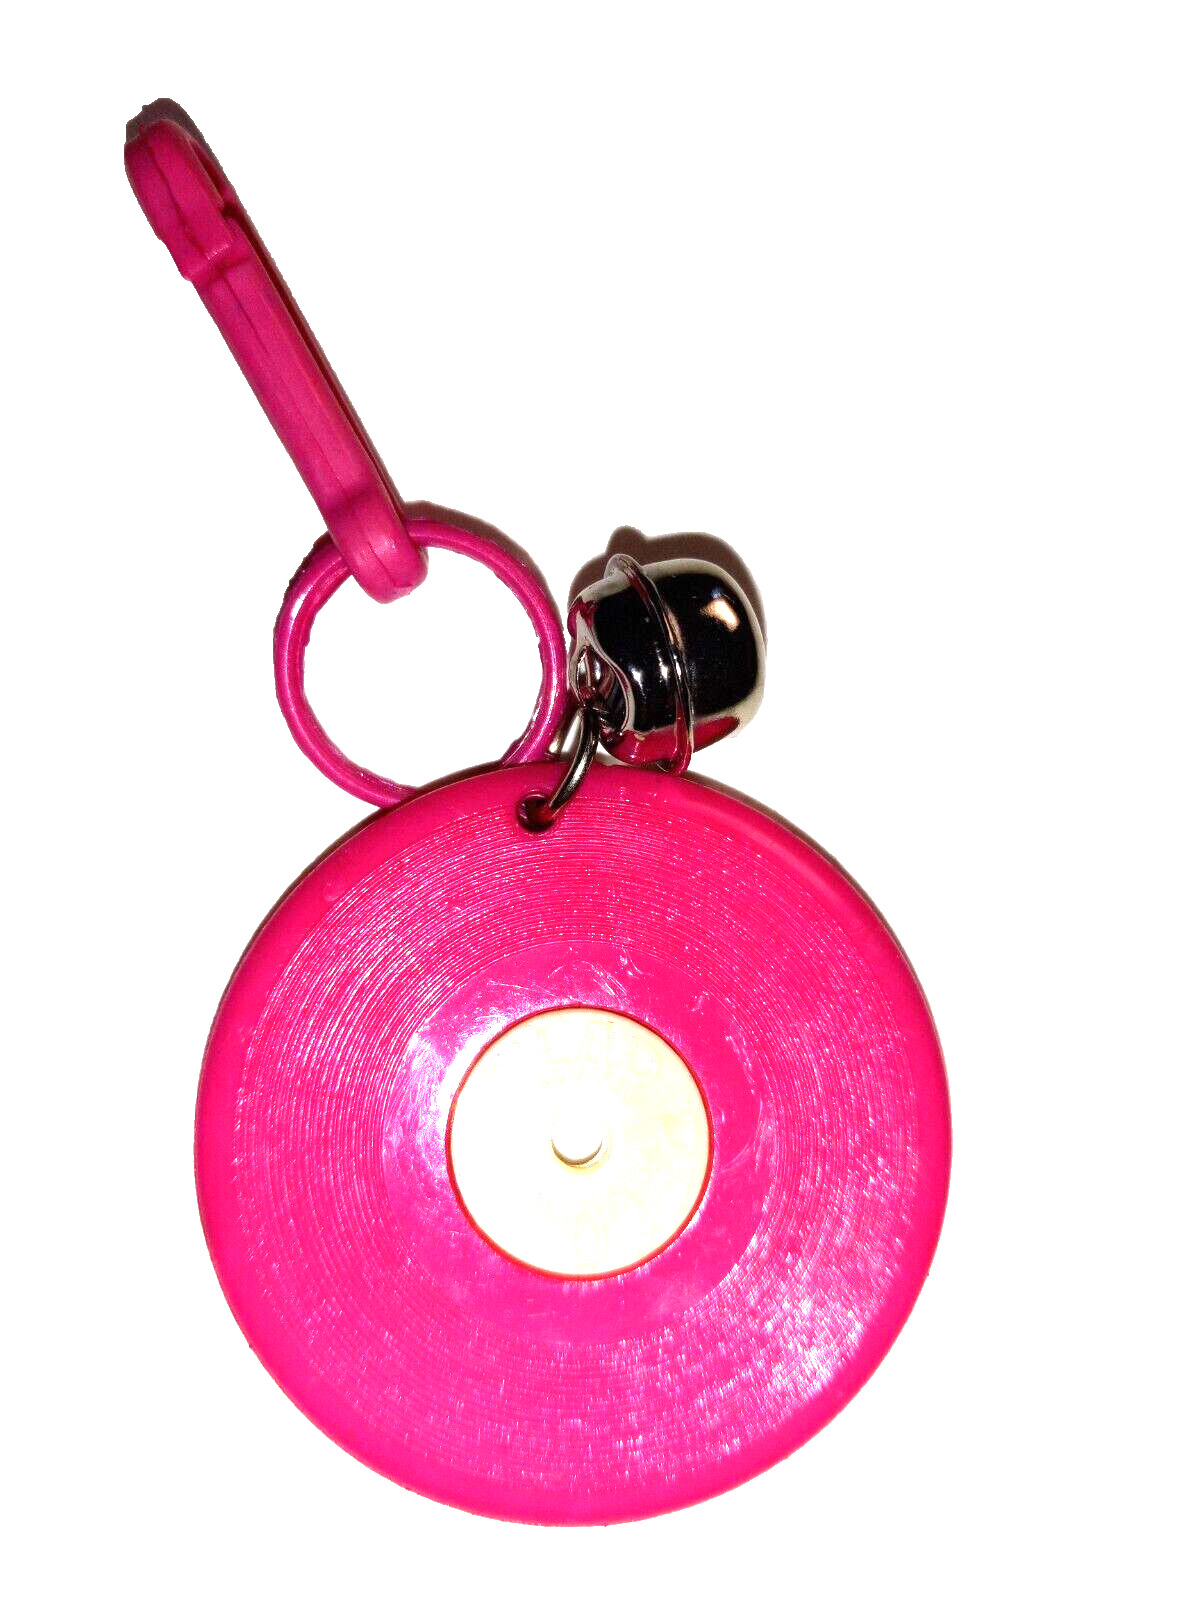 Vintage 1980s Plastic Charm Hot Pink Record Album Charms Necklace Clip On Retro